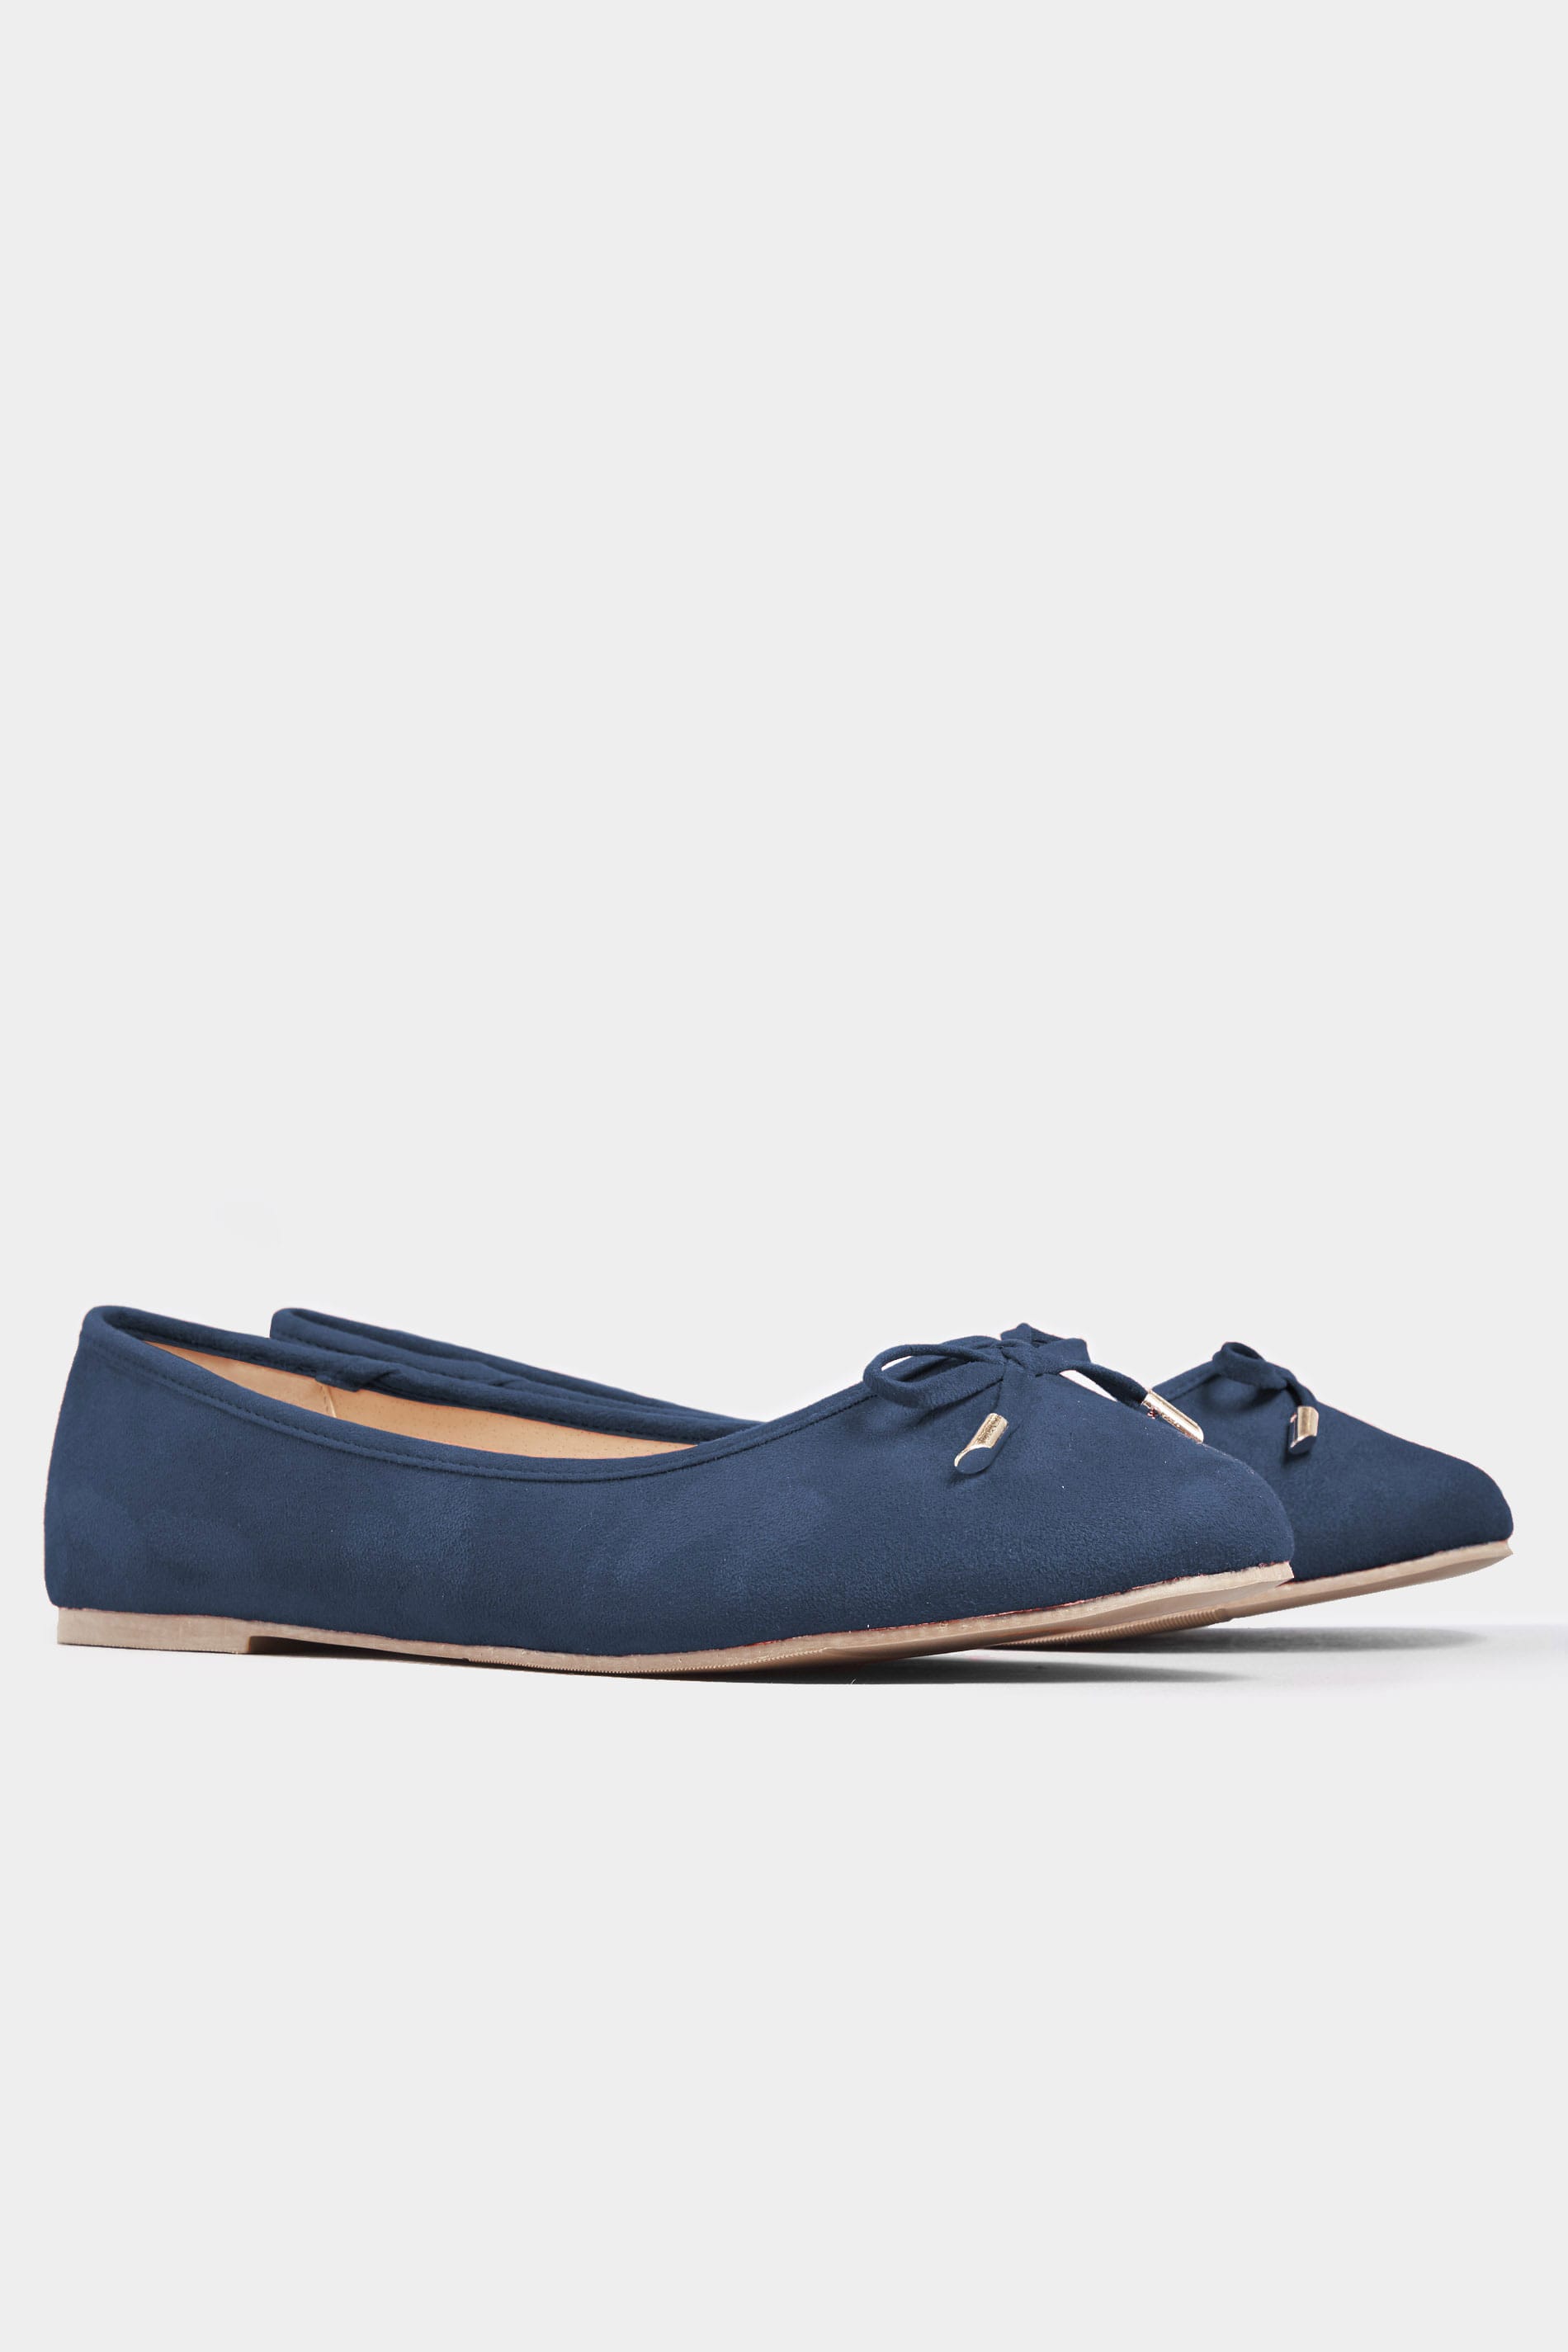 Navy Ballerina Pumps In Extra Wide Fit_c62a.jpg